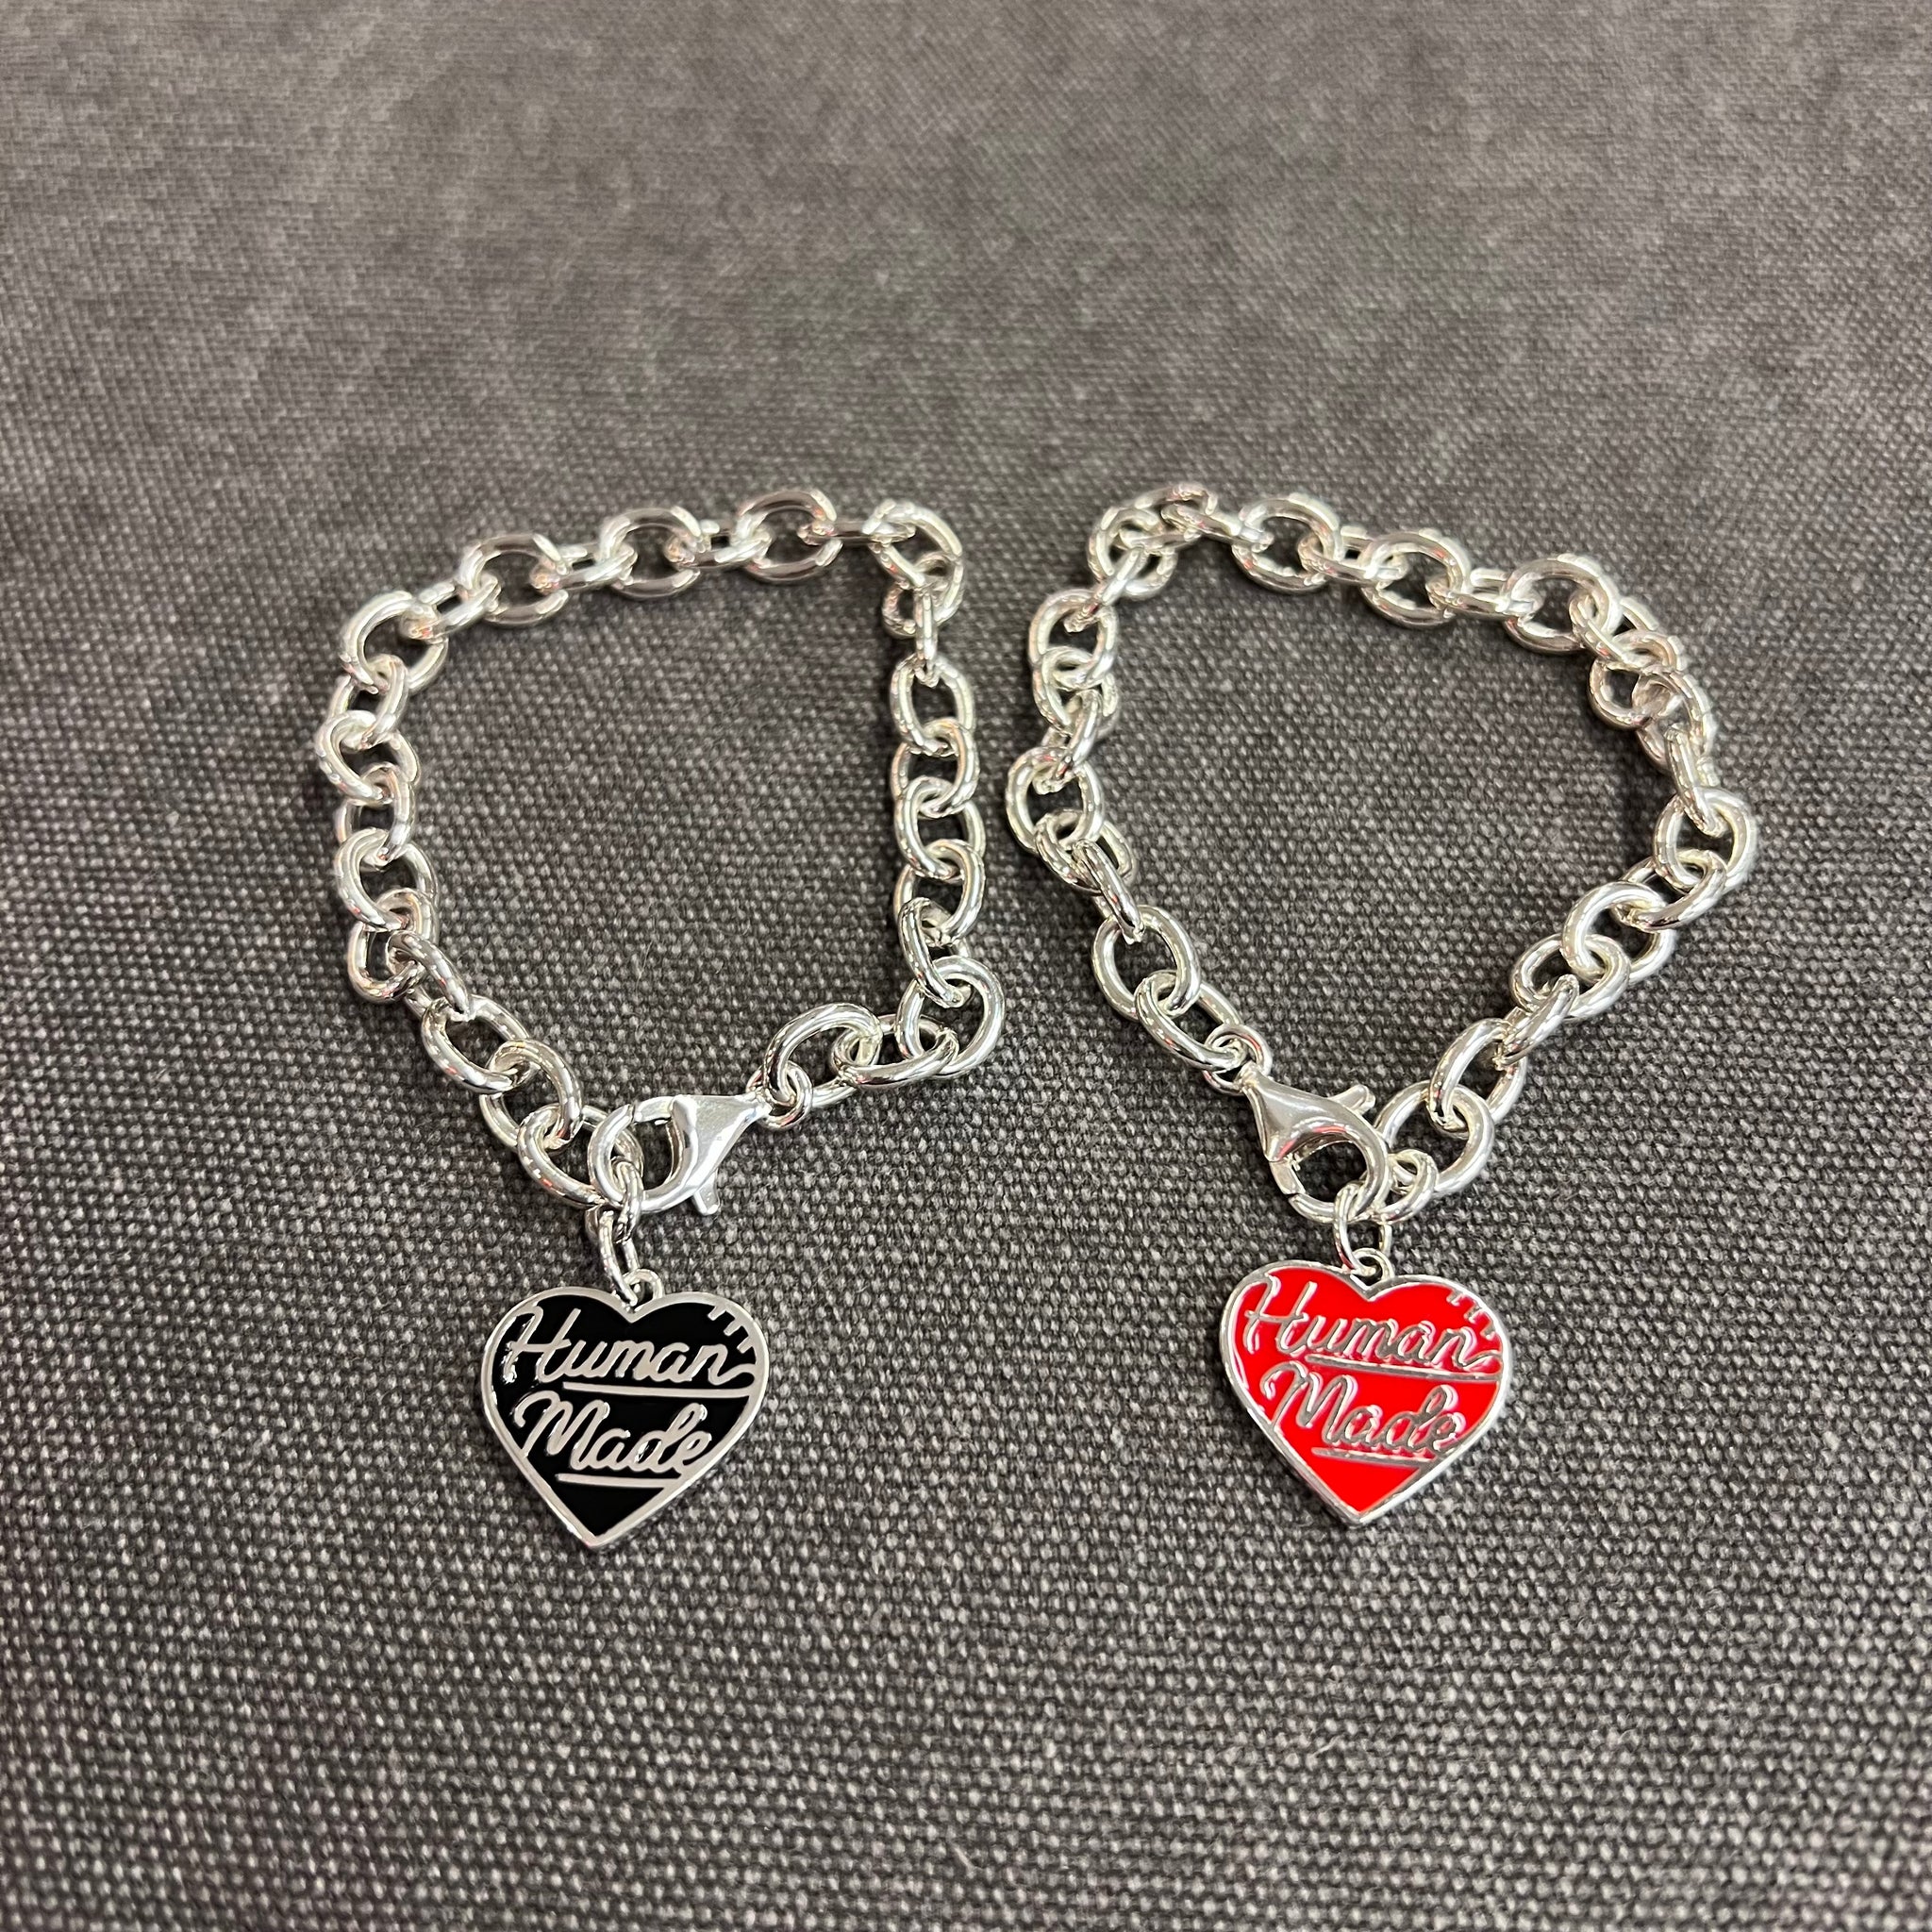 Human Made Heart Silver Bracelet36000はどうでしょうか